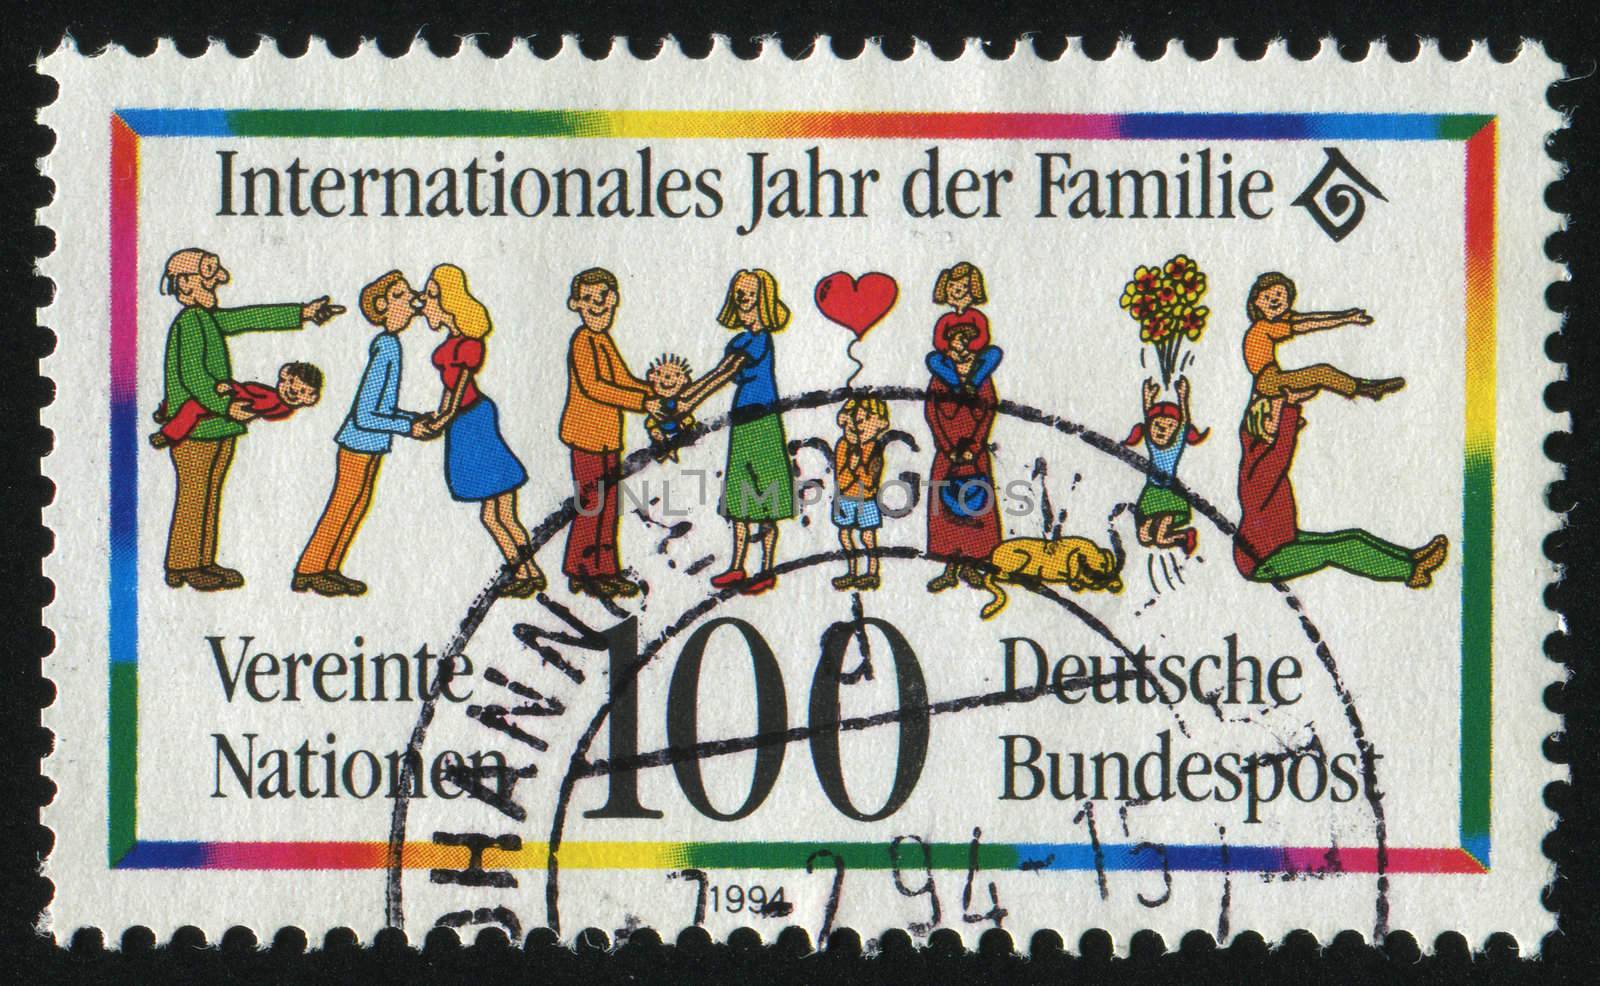 GERMANY- CIRCA 1994: stamp printed by Germany, shows Year of the Family, circa 1994.